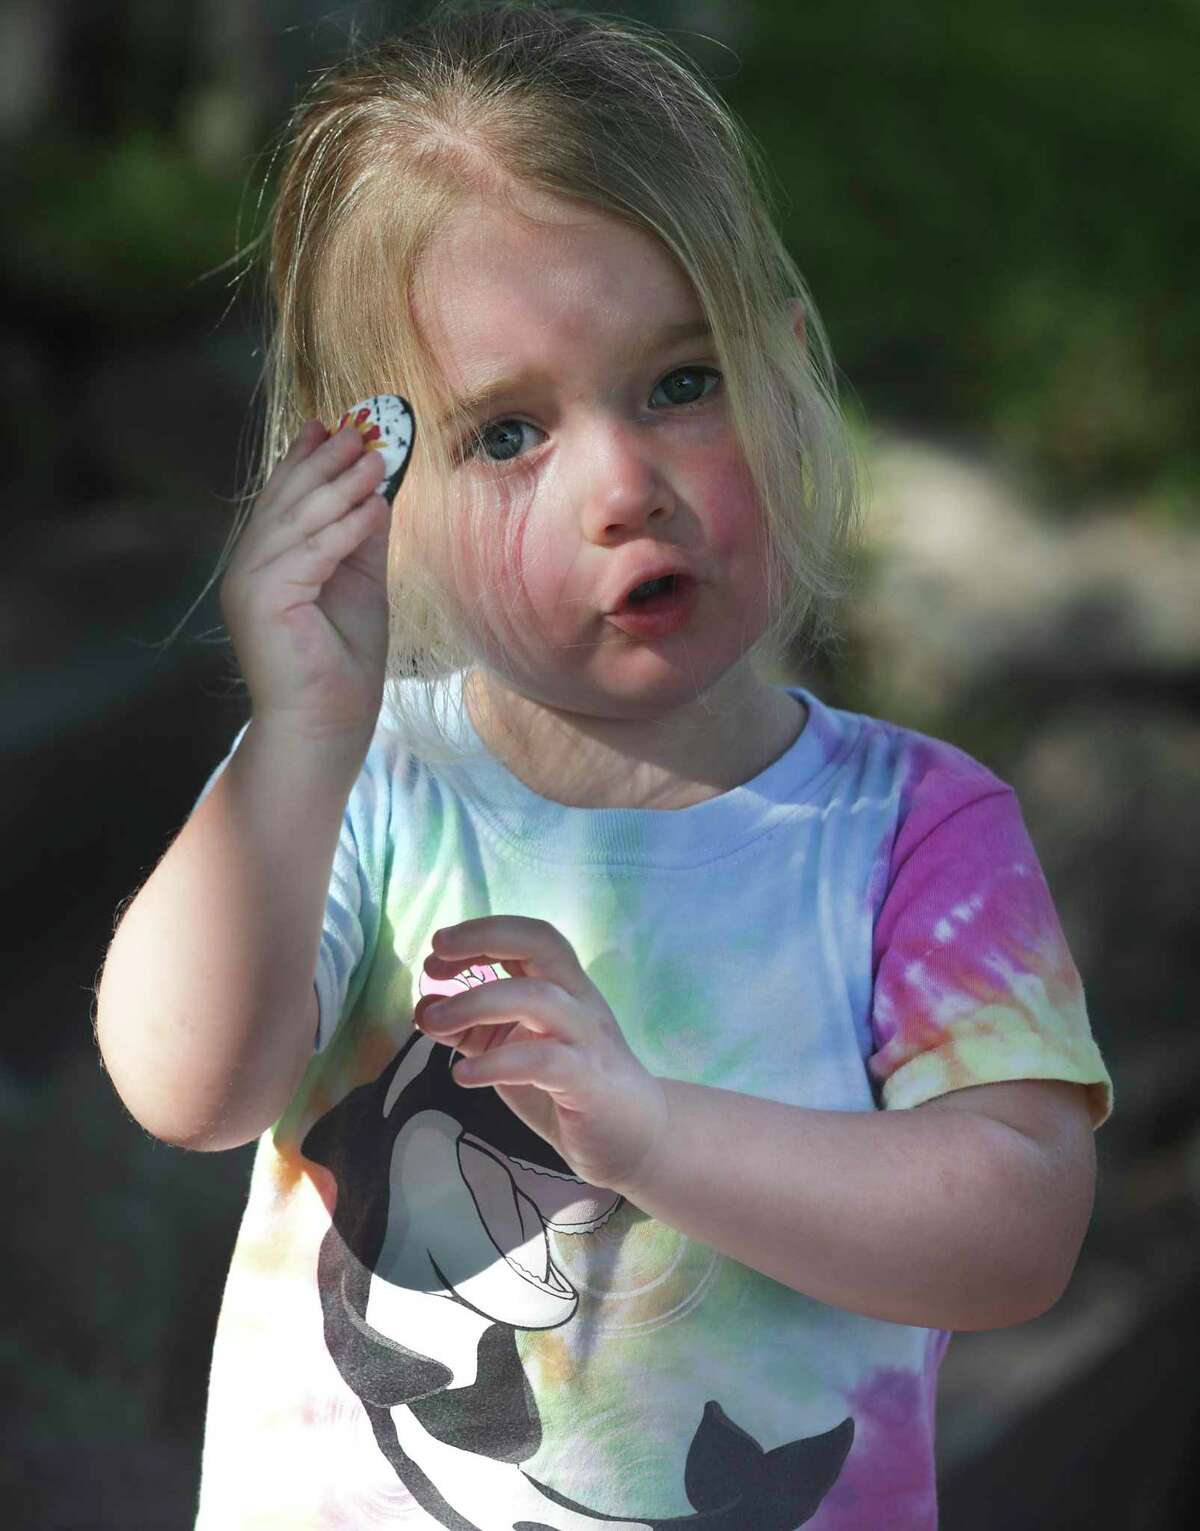 Two-year-old Frannie shows her favorite rock during a walk around her North Side neighborhood on June 8, 2020. Lisbeth Anne Dunlap, mother of three and a missionary, has been secretly uplifting the neighborhood by leaving painted rocks throughout the subdivision and posting anonymous jokes on the fence at Northwood Elementary School.